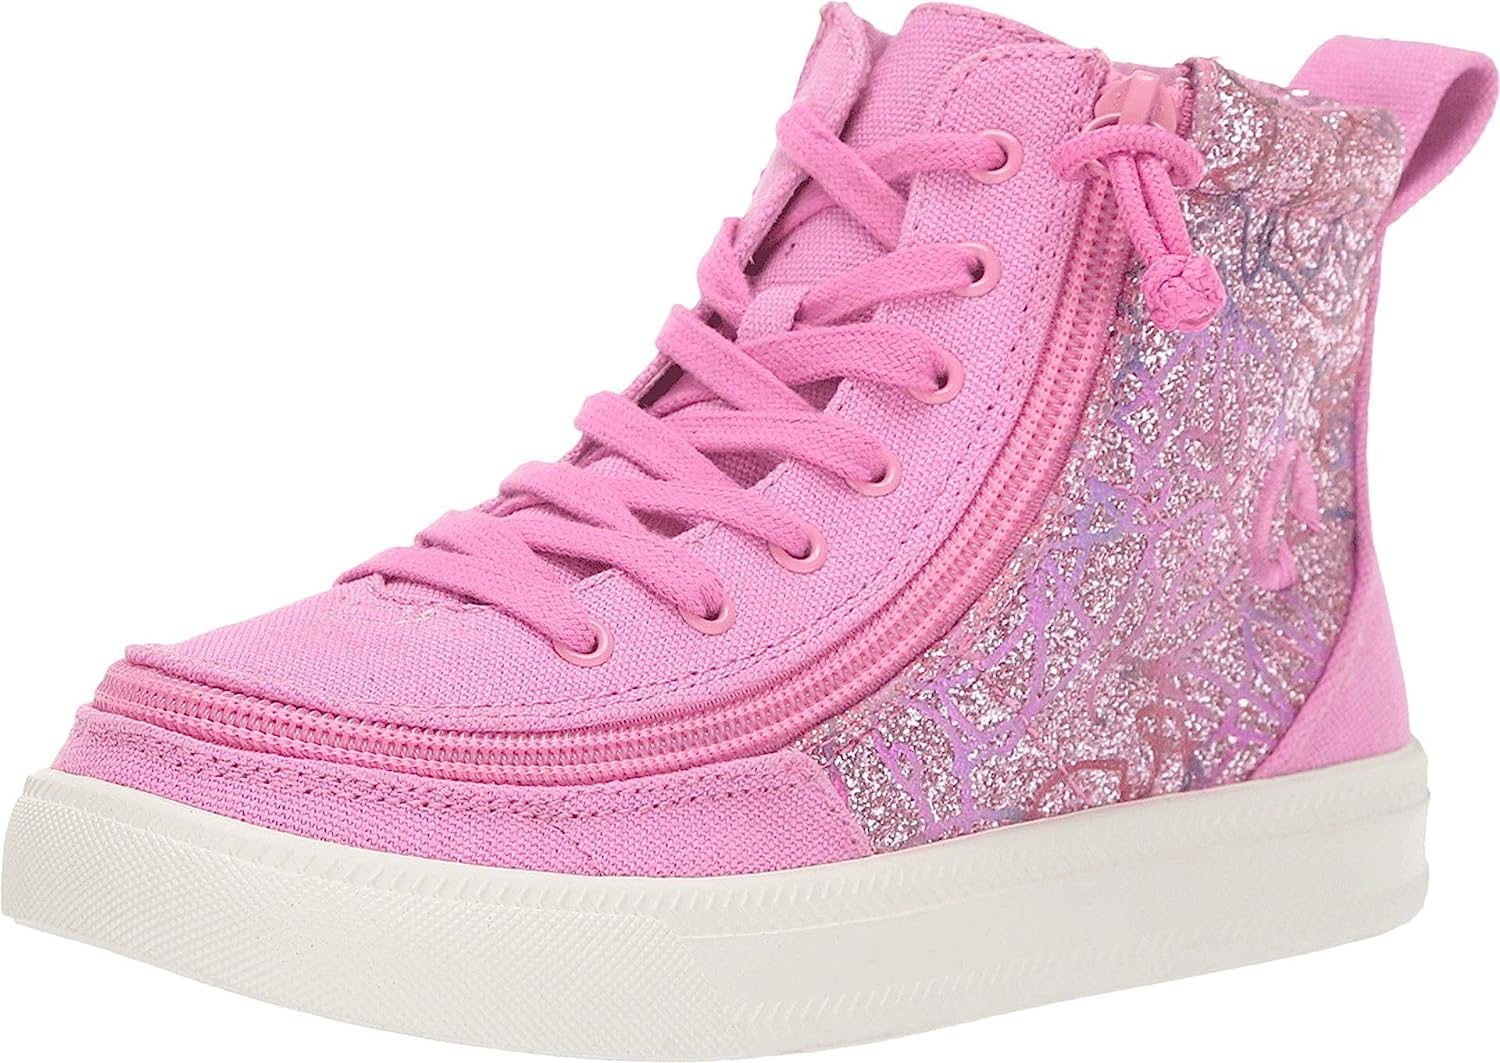 BILLY Footwear Kids Baby Girl's Classic Lace High [...]